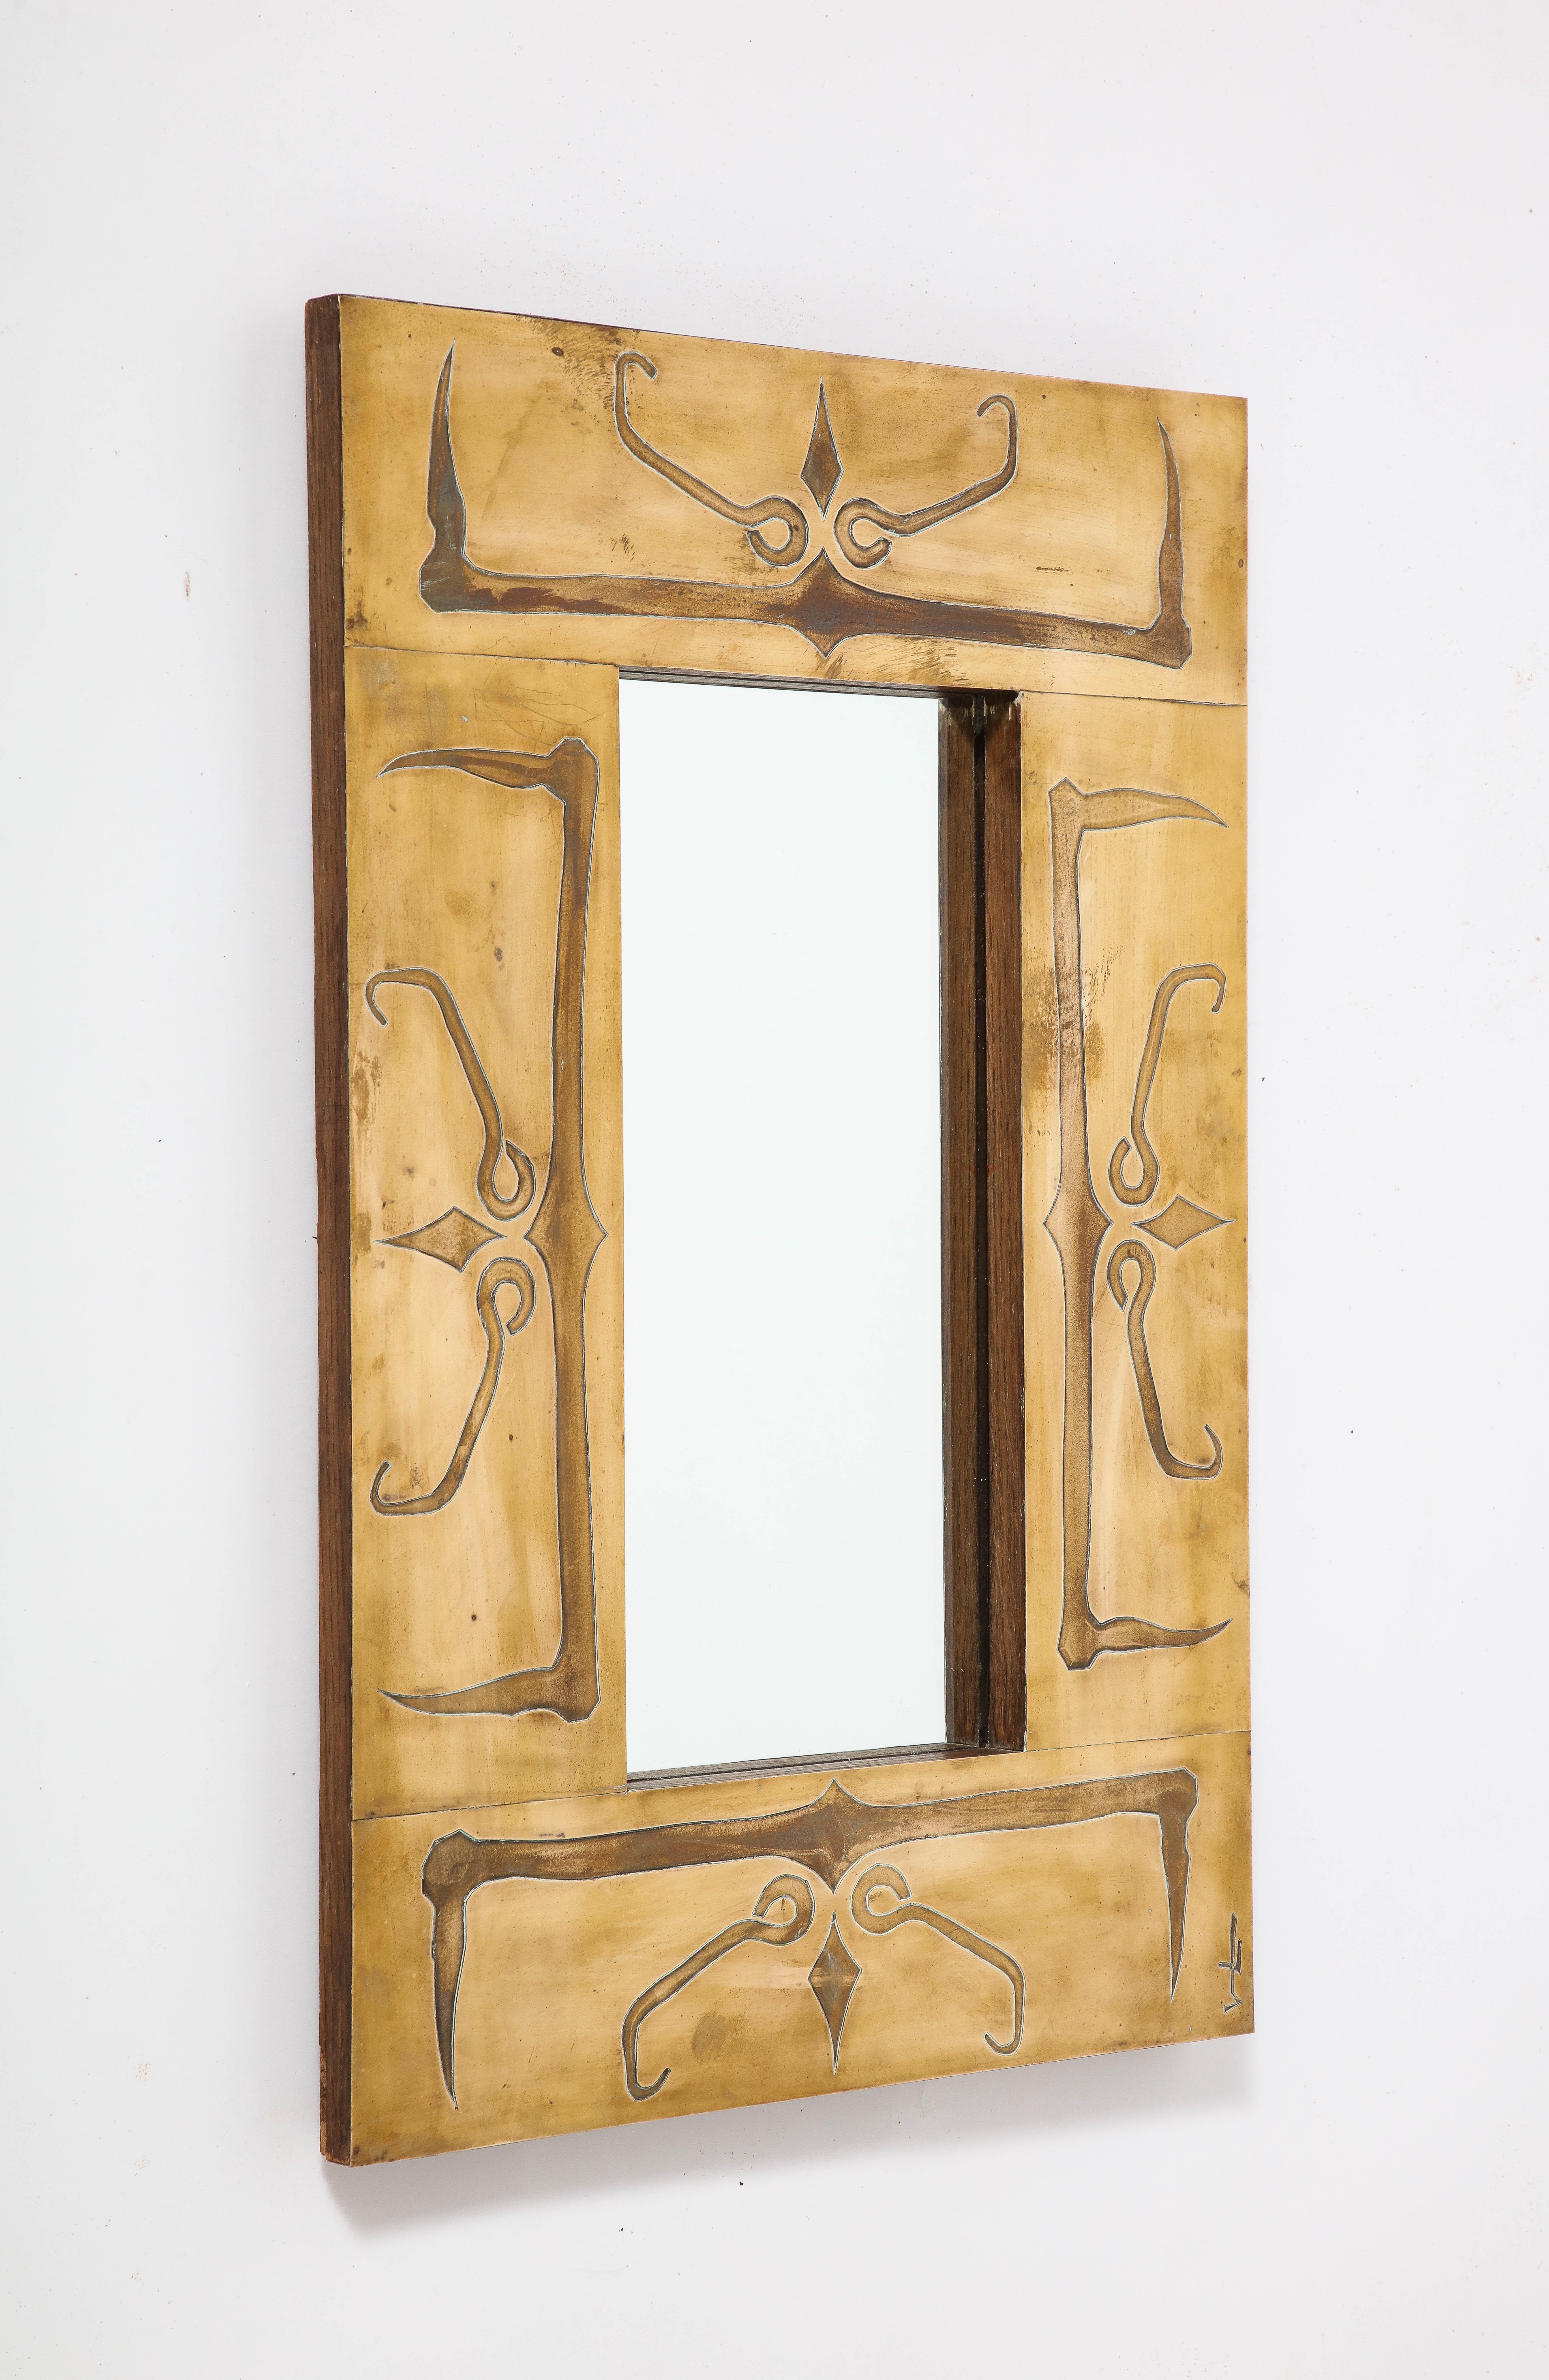 A highly unique French Art Deco brass framed mirror with engraved abstract  motif.  Signed on lower right corner. 
France, circa 1940
Size: 24